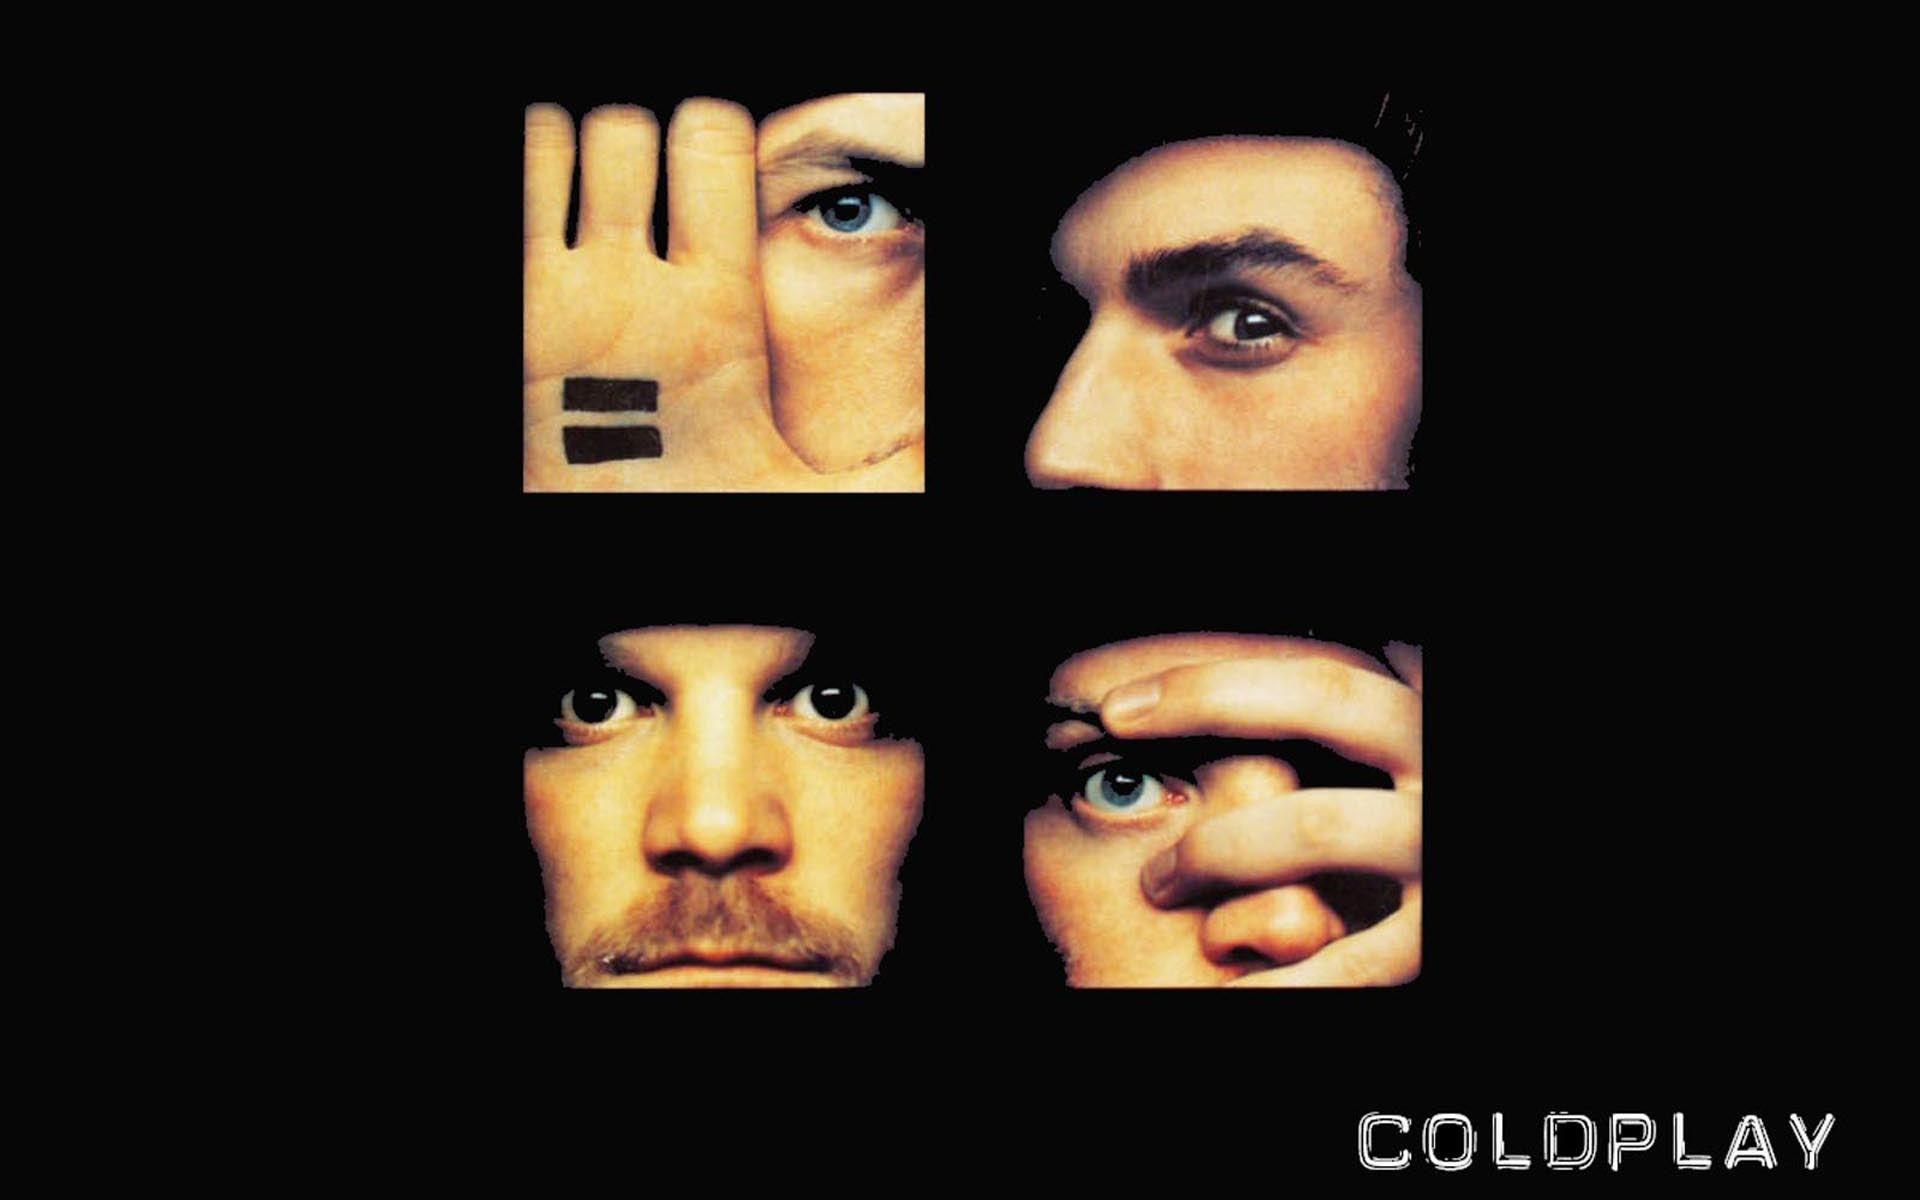 Coldplay the bands cover wallpaper and image